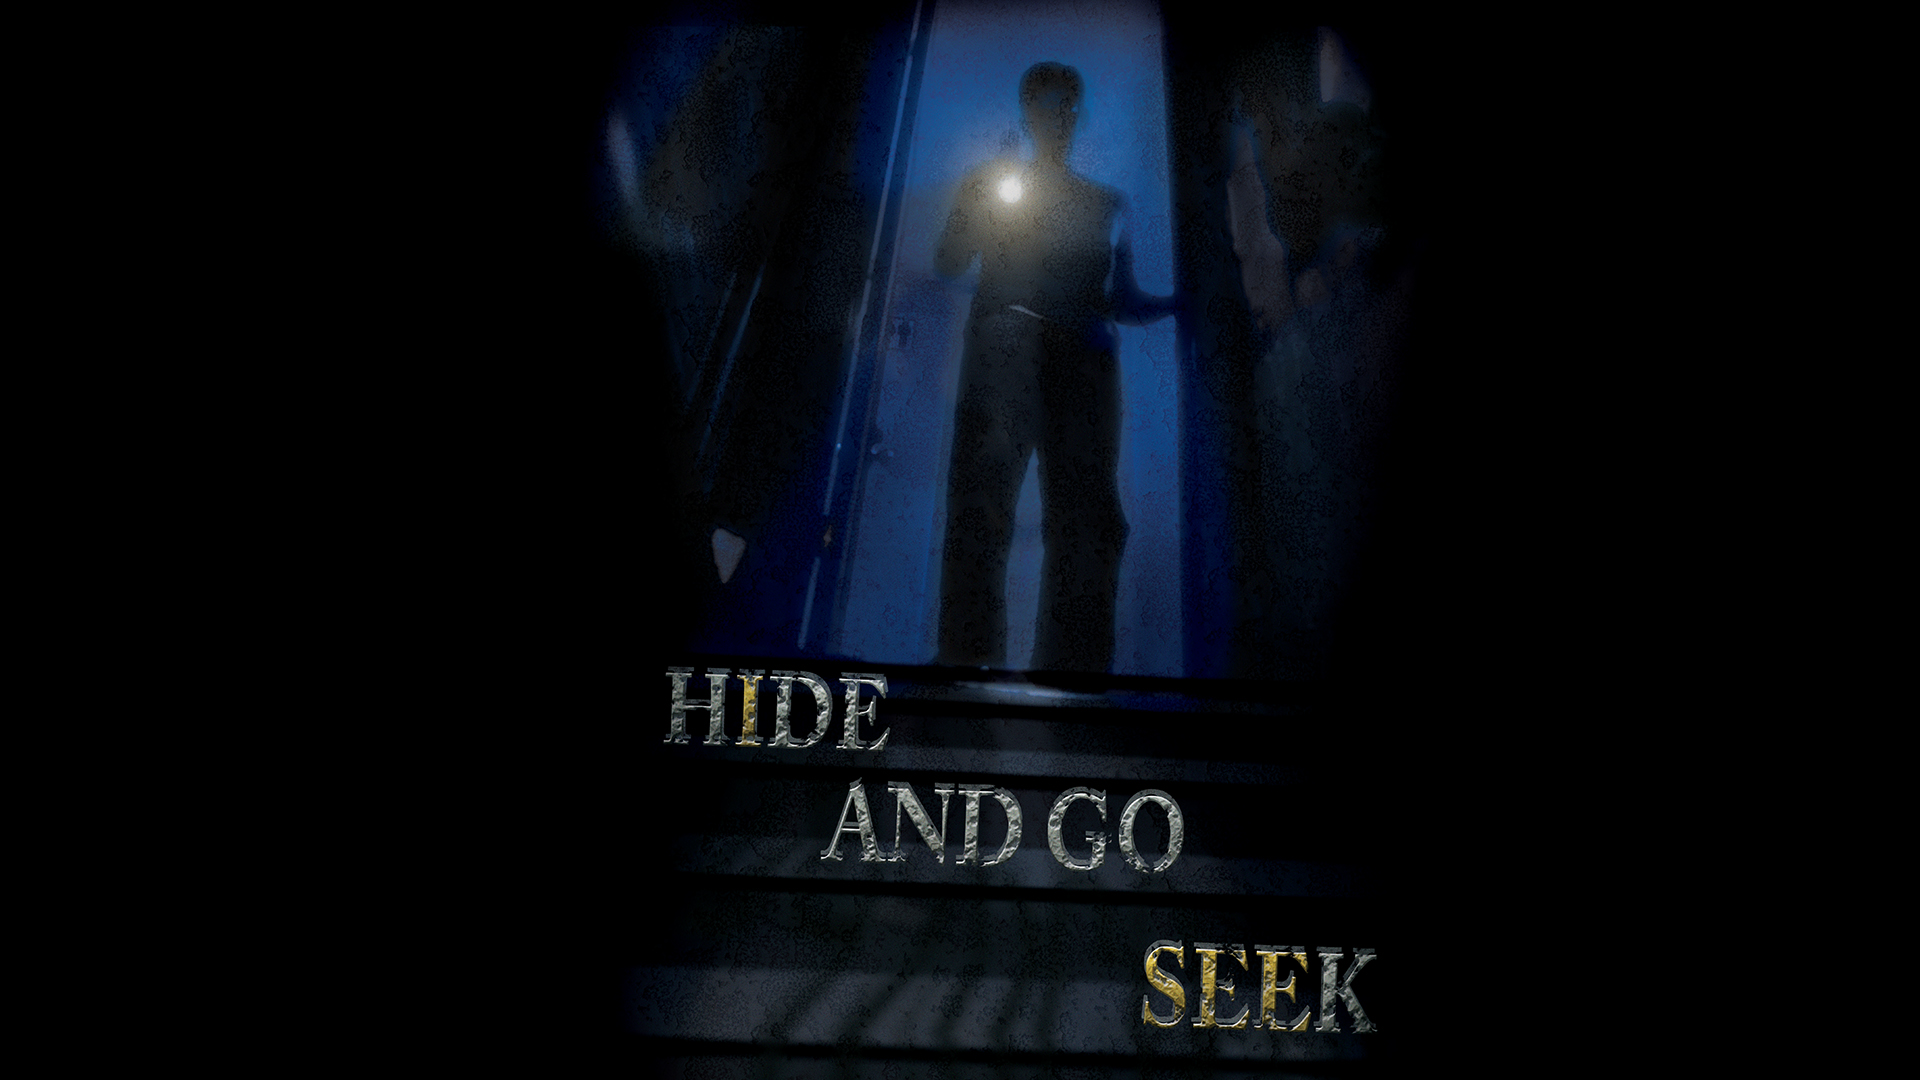 The poster from Hide and Go Seek